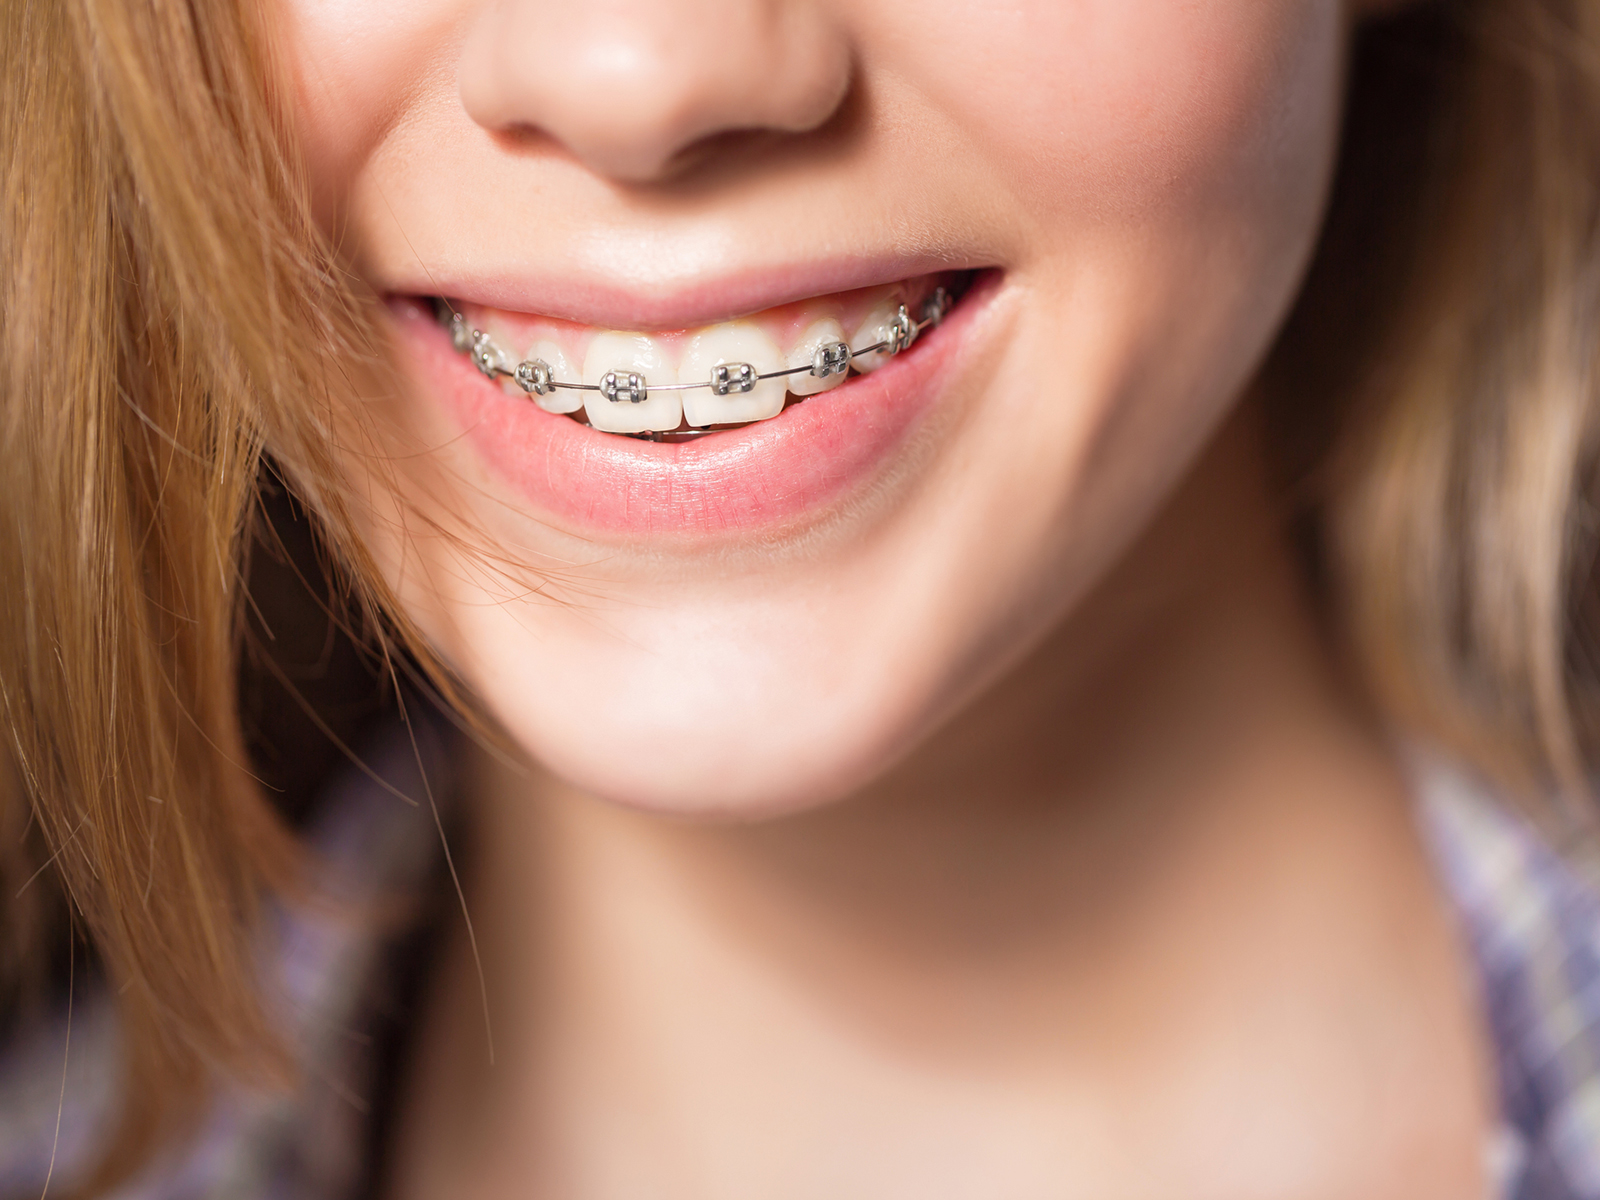 What can you eat, not eat with braces?